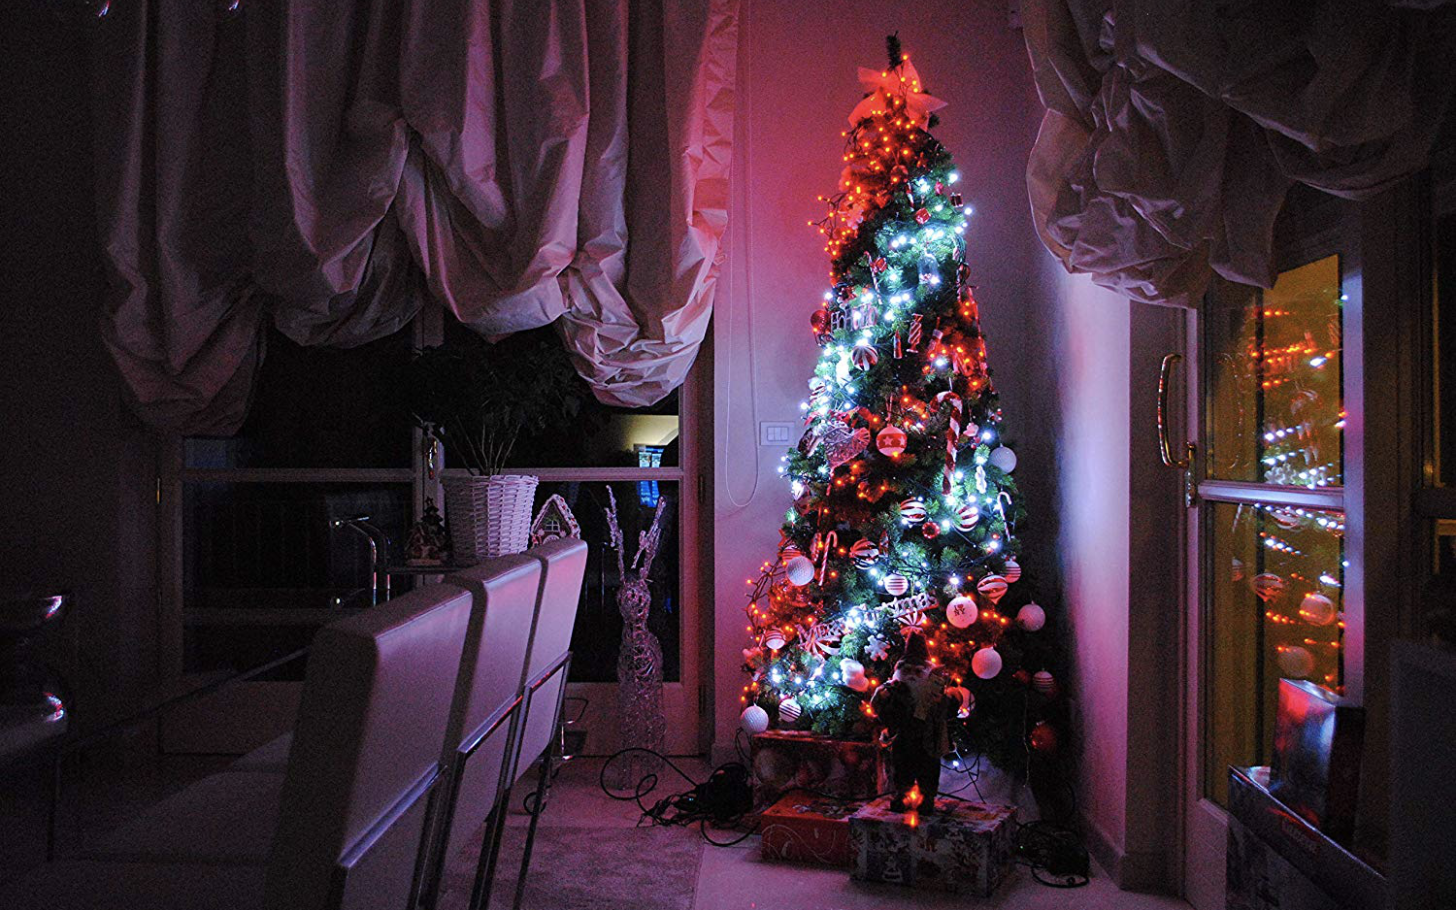 Twinkly's 225 Count Smart LED Christmas Tree Lights Can Put Your Childhood Tree To Shame For